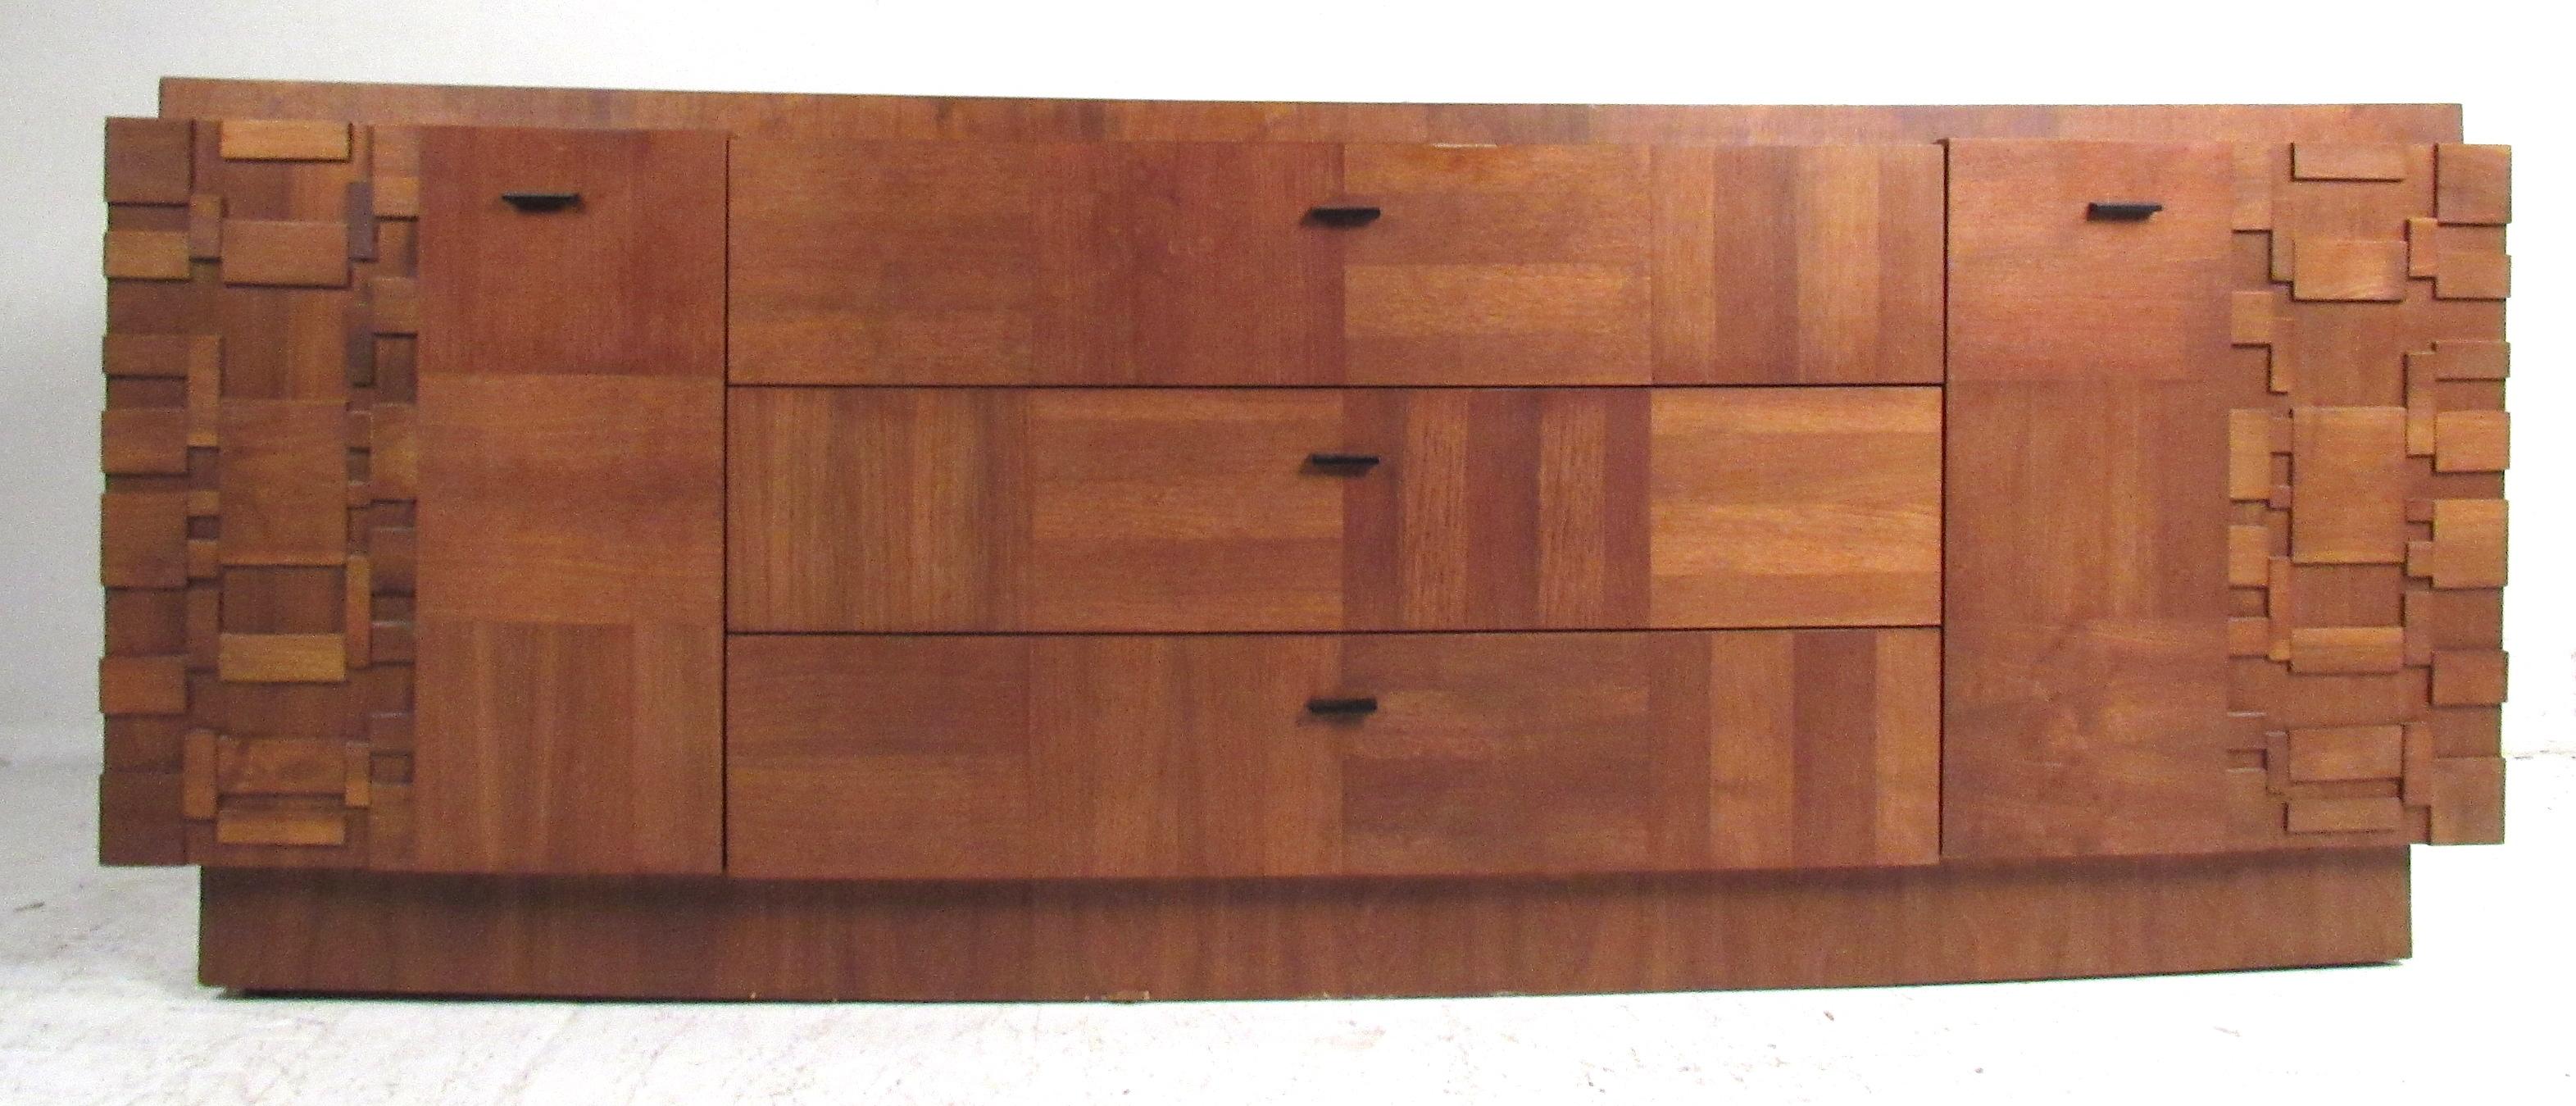 Dramatic five piece Brutalist bedroom set made in Canada, 1975. Dimensional patchwork design with a contrasting parquet style walnut construction makes a impressive Brutalist statement. Set consists of a tall wardrobe, a long low dresser with